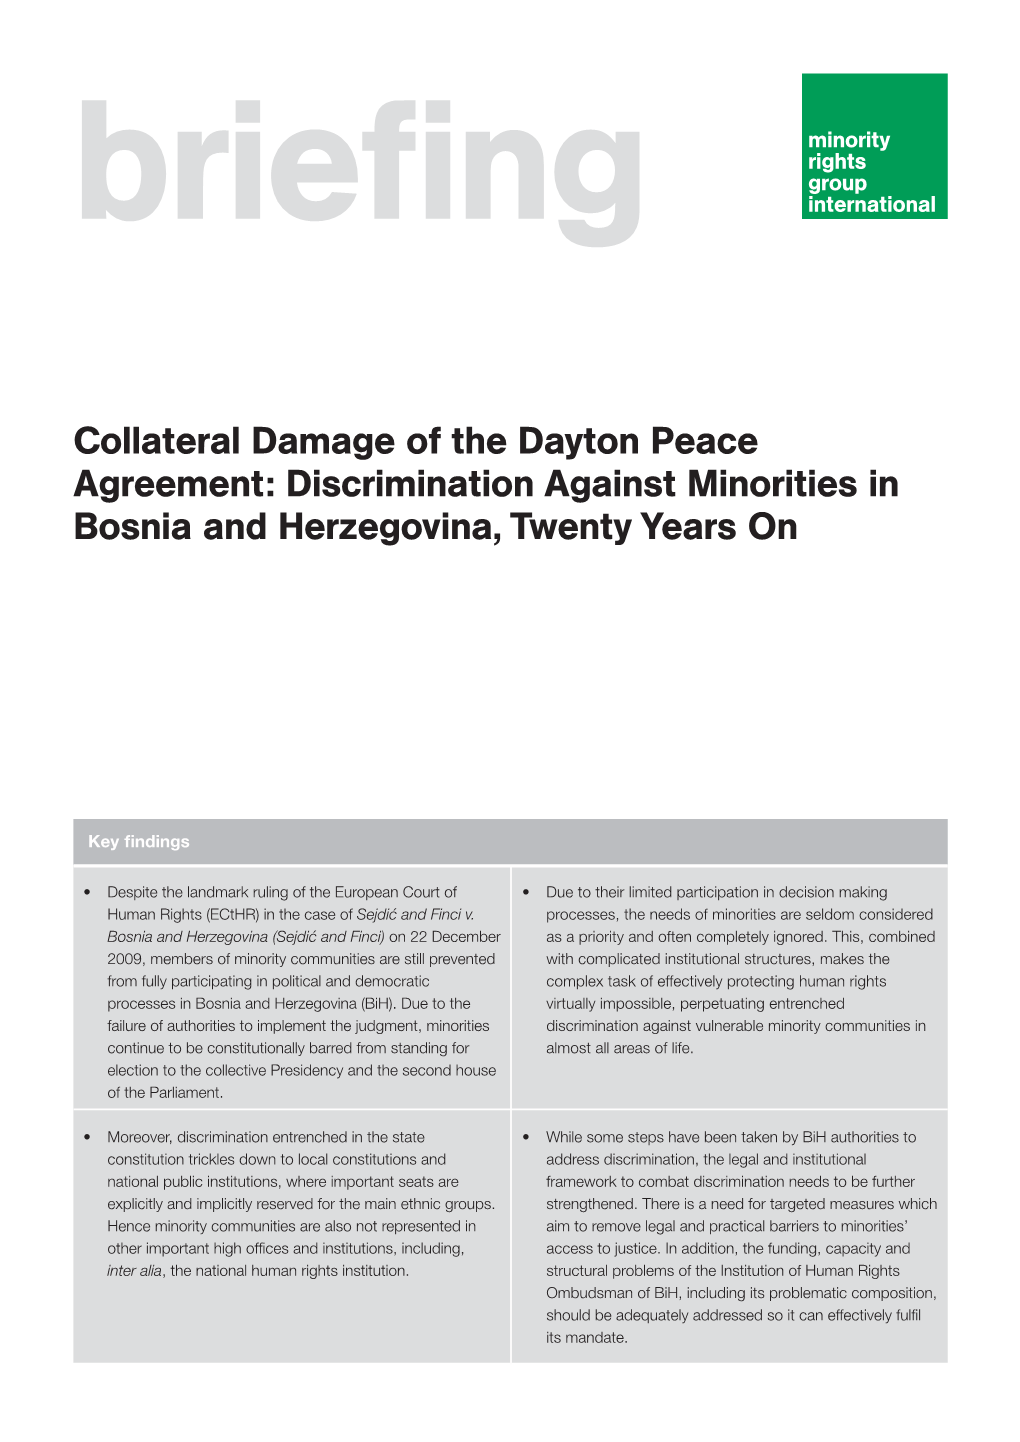 Collateral Damage of the Dayton Peace Agreement: Discrimination Against Minorities in Bosnia and Herzegovina, Twenty Years On